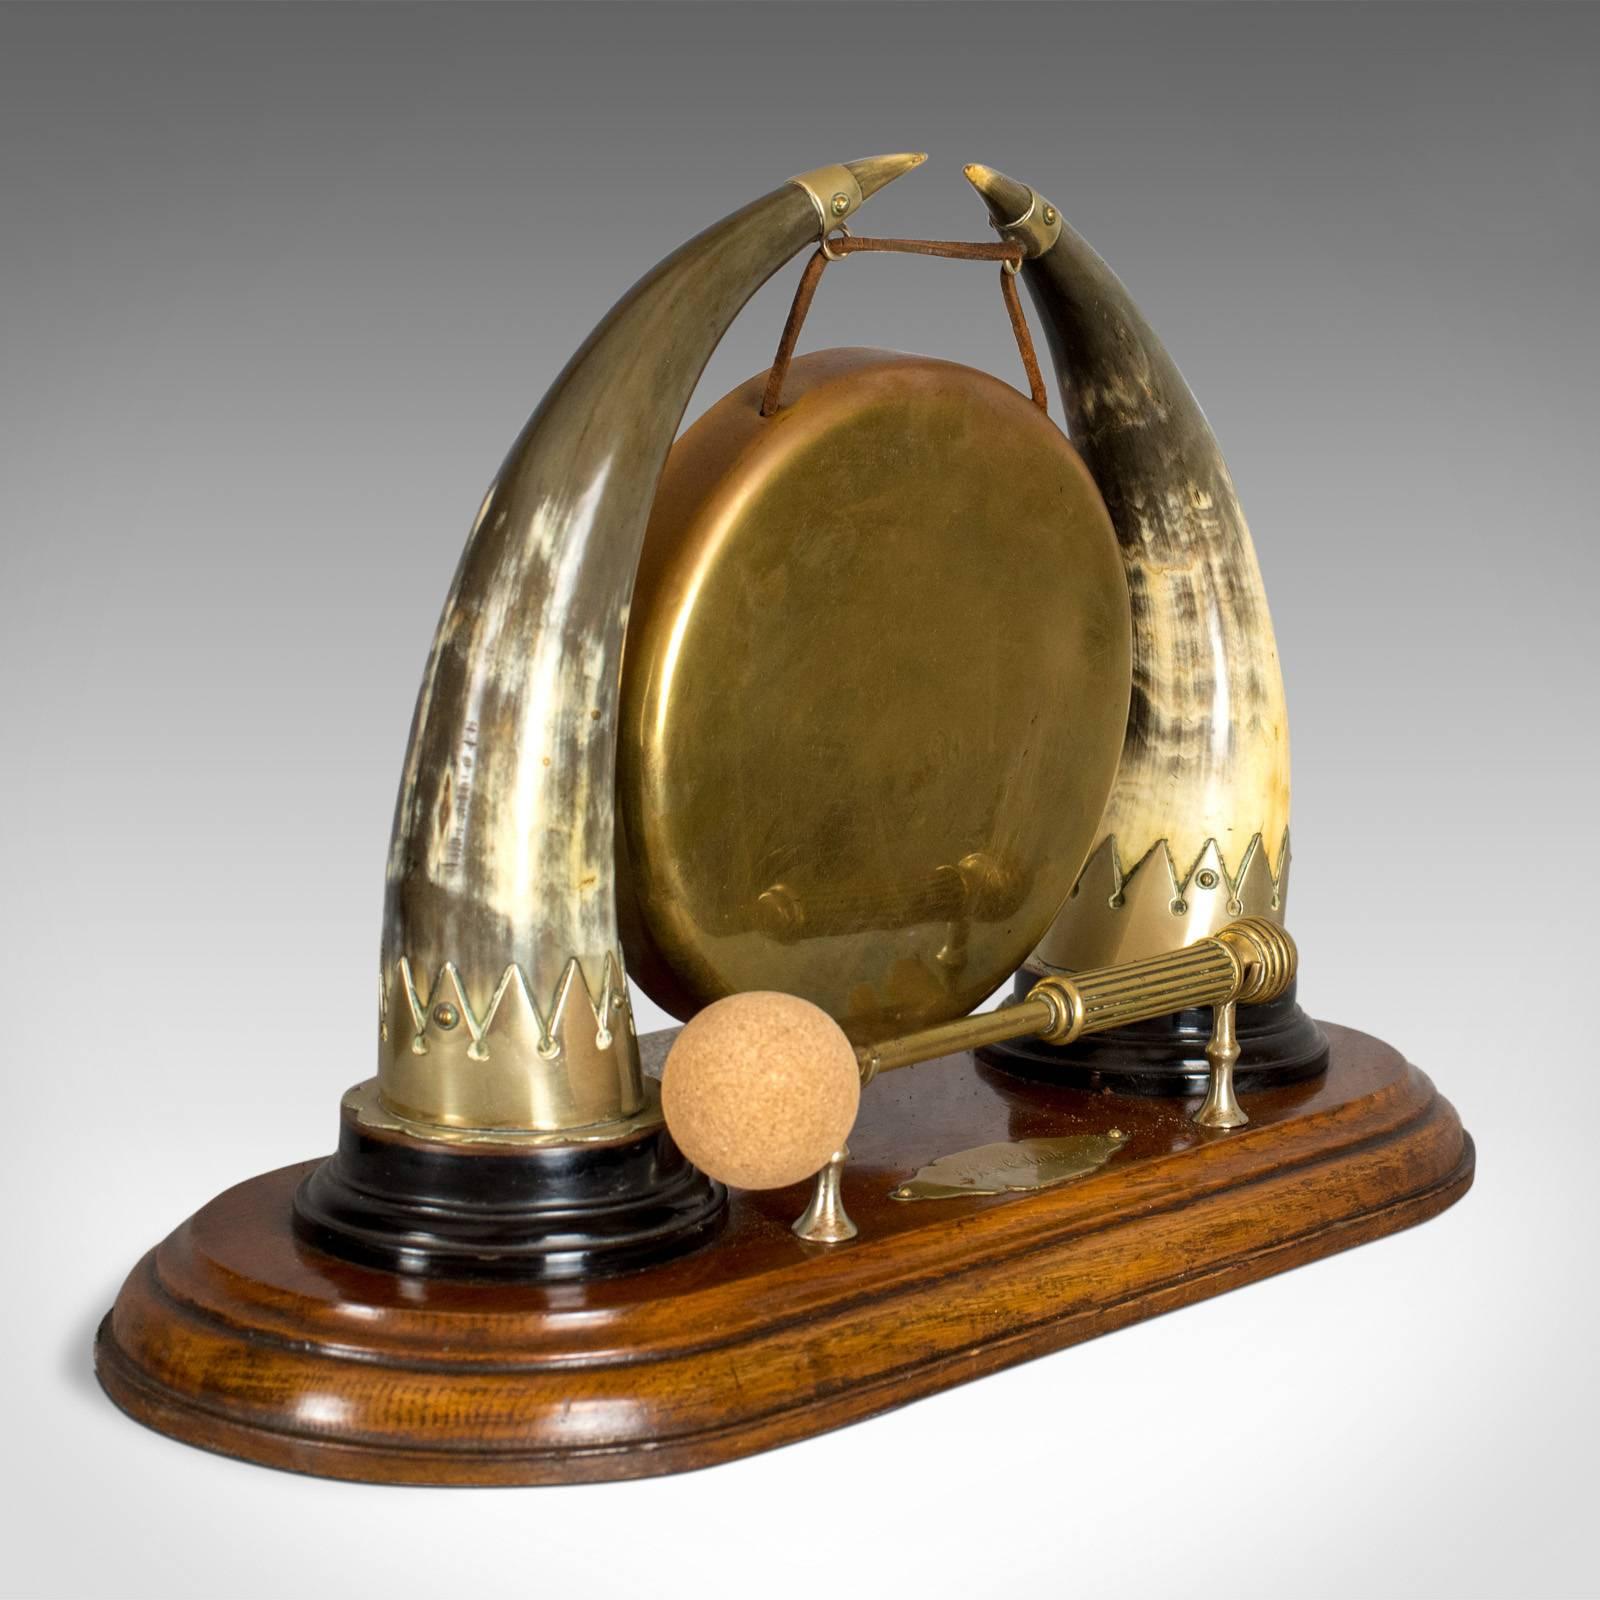 This is an antique dinner gong, an English, Edwardian table gong hung from cow horns on an oak plinth, circa 1910. 

Magnificent antique table dinner gong
Bronze gong hung on leather straps from silvered mounts
Attractive polished cow horn